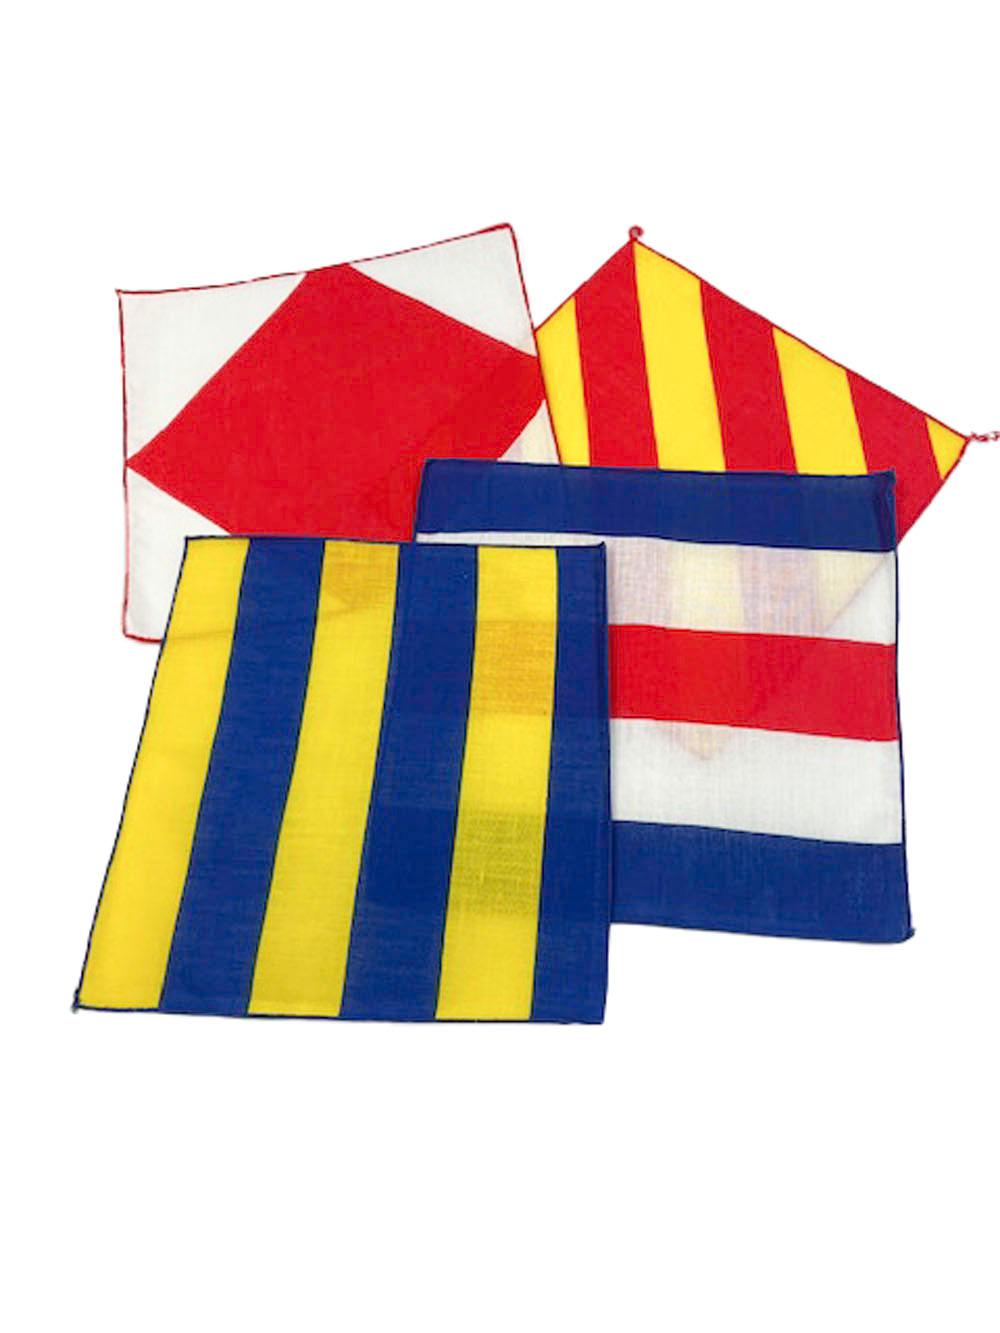 Boxed set of 12 nautical flag linen cocktail napkins by Leacock of New York. Printed on linen in red, white, blue and yellow, an enclosed card identifies the letter, word and meaning each flag represents. The napkins appear to have never been used.